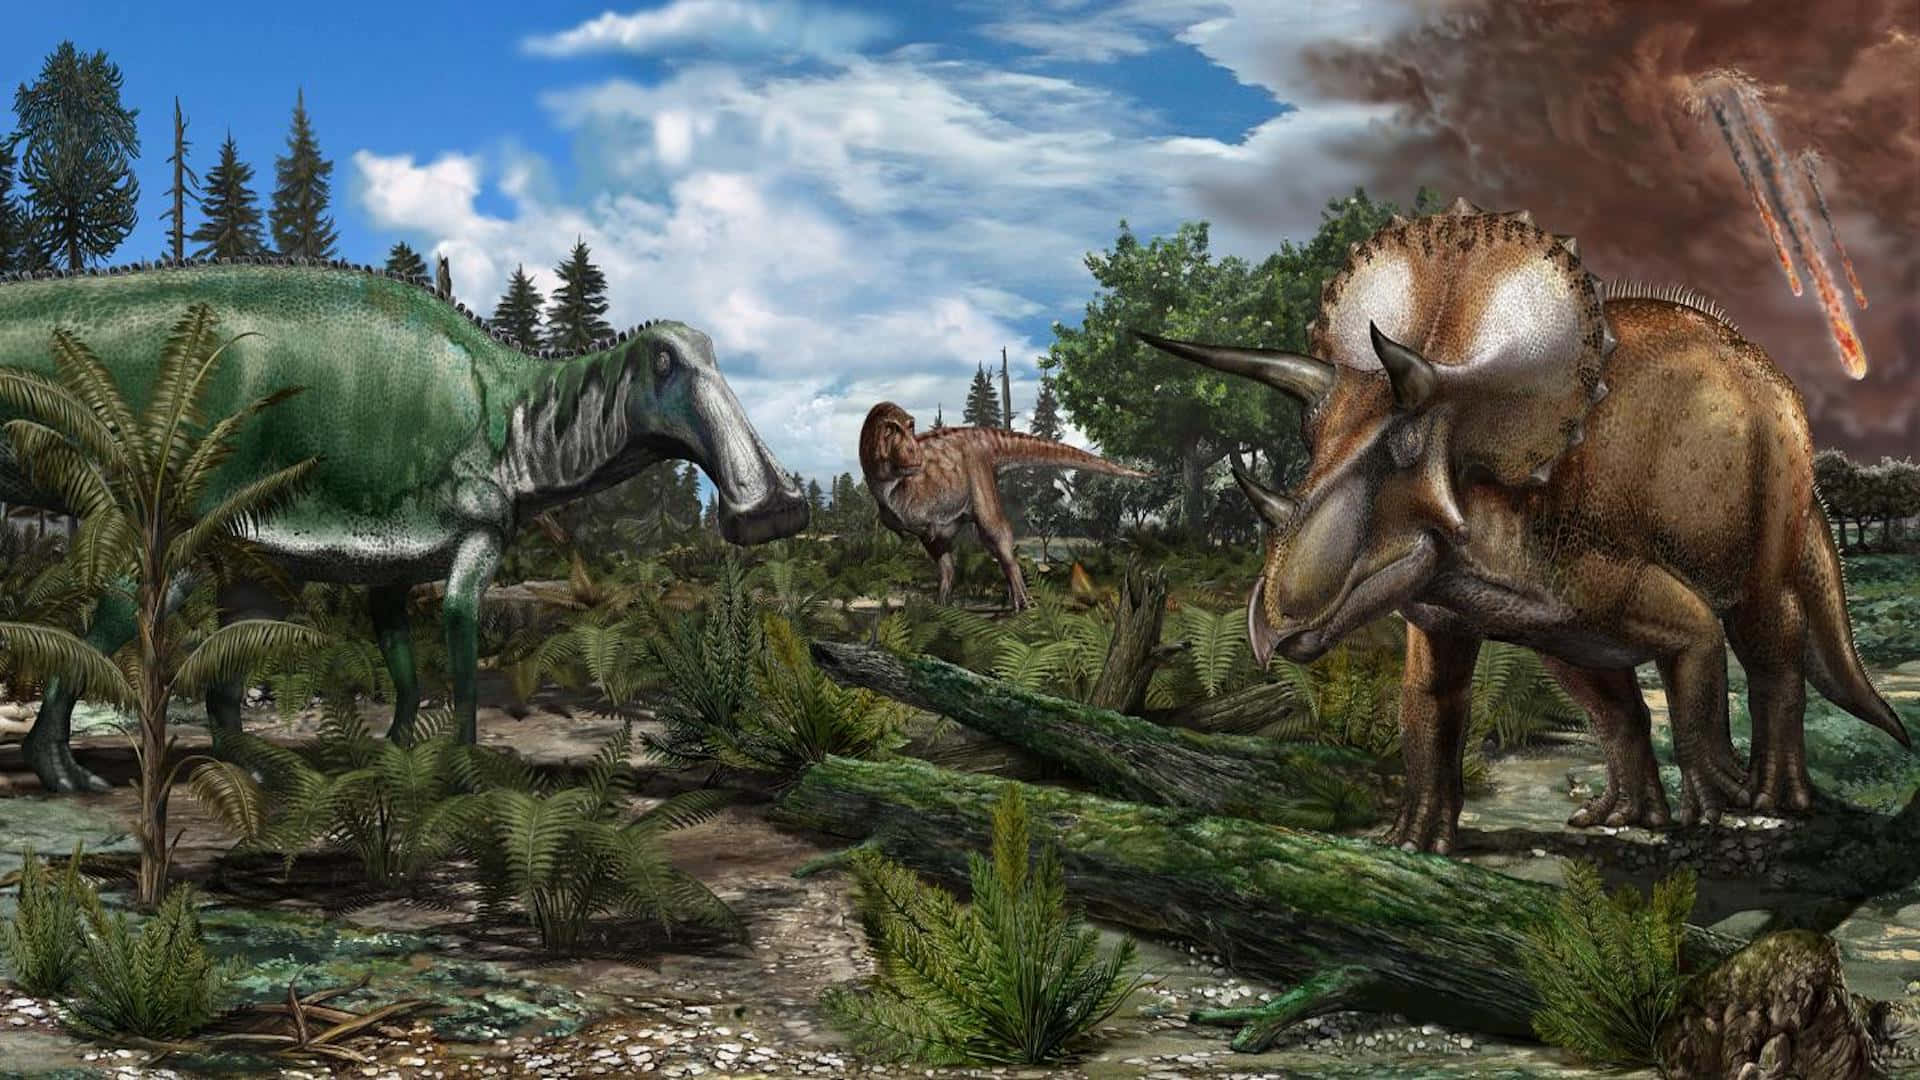 Life from the past – a dinosaur background featuring a Brachiosaurus